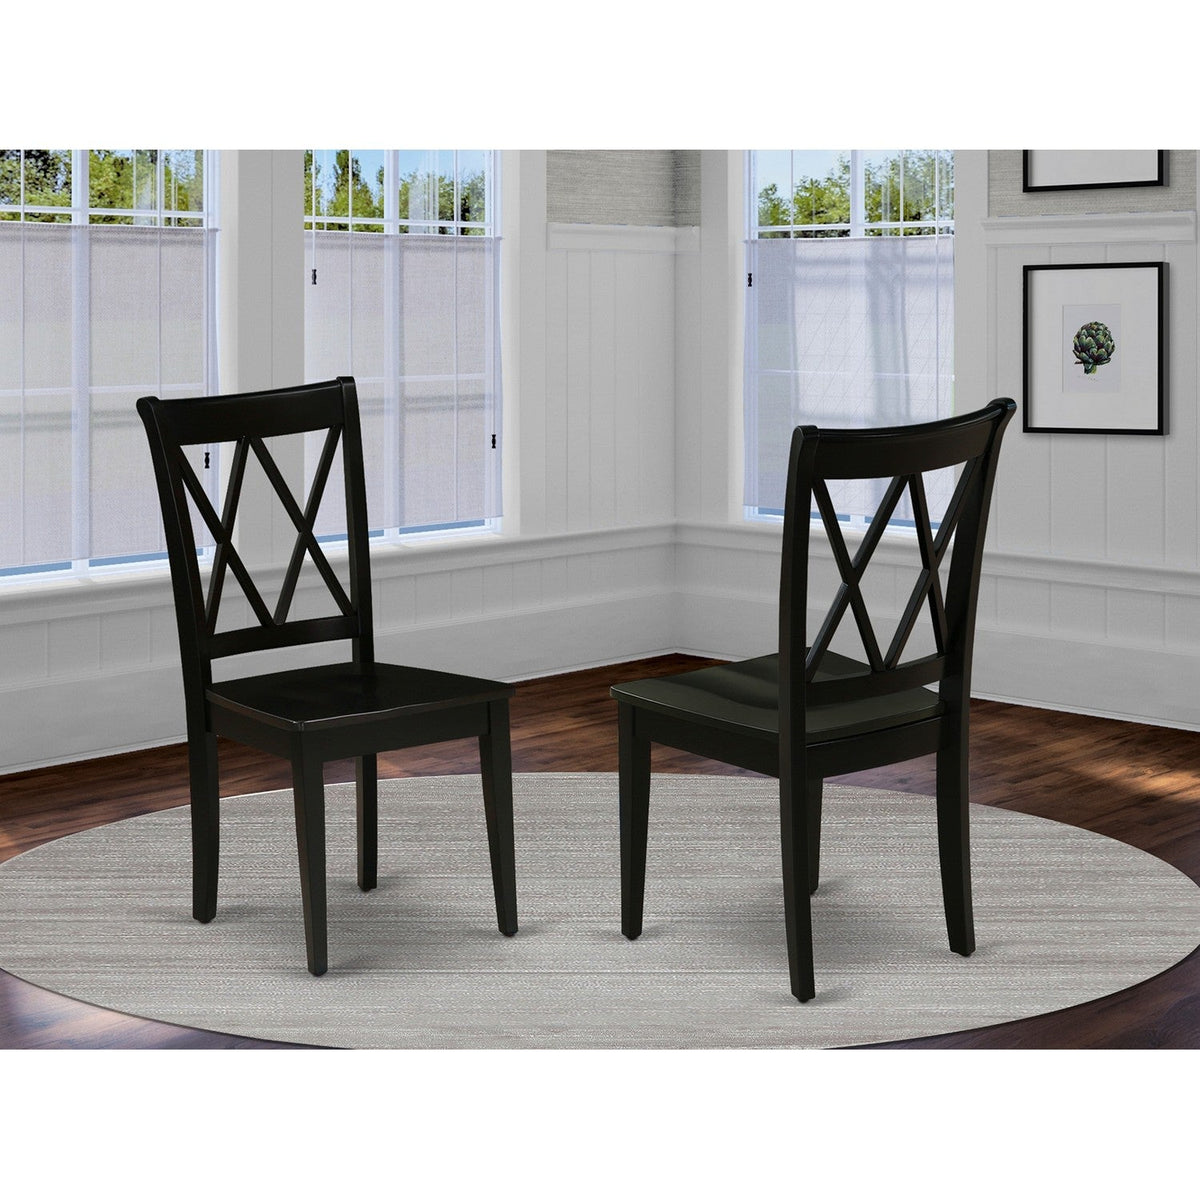 East West Furniture CLC-MAH-C Clarksville Double X-back chairs with Linen Fabric Upholstered Seat in Mahogany finish 